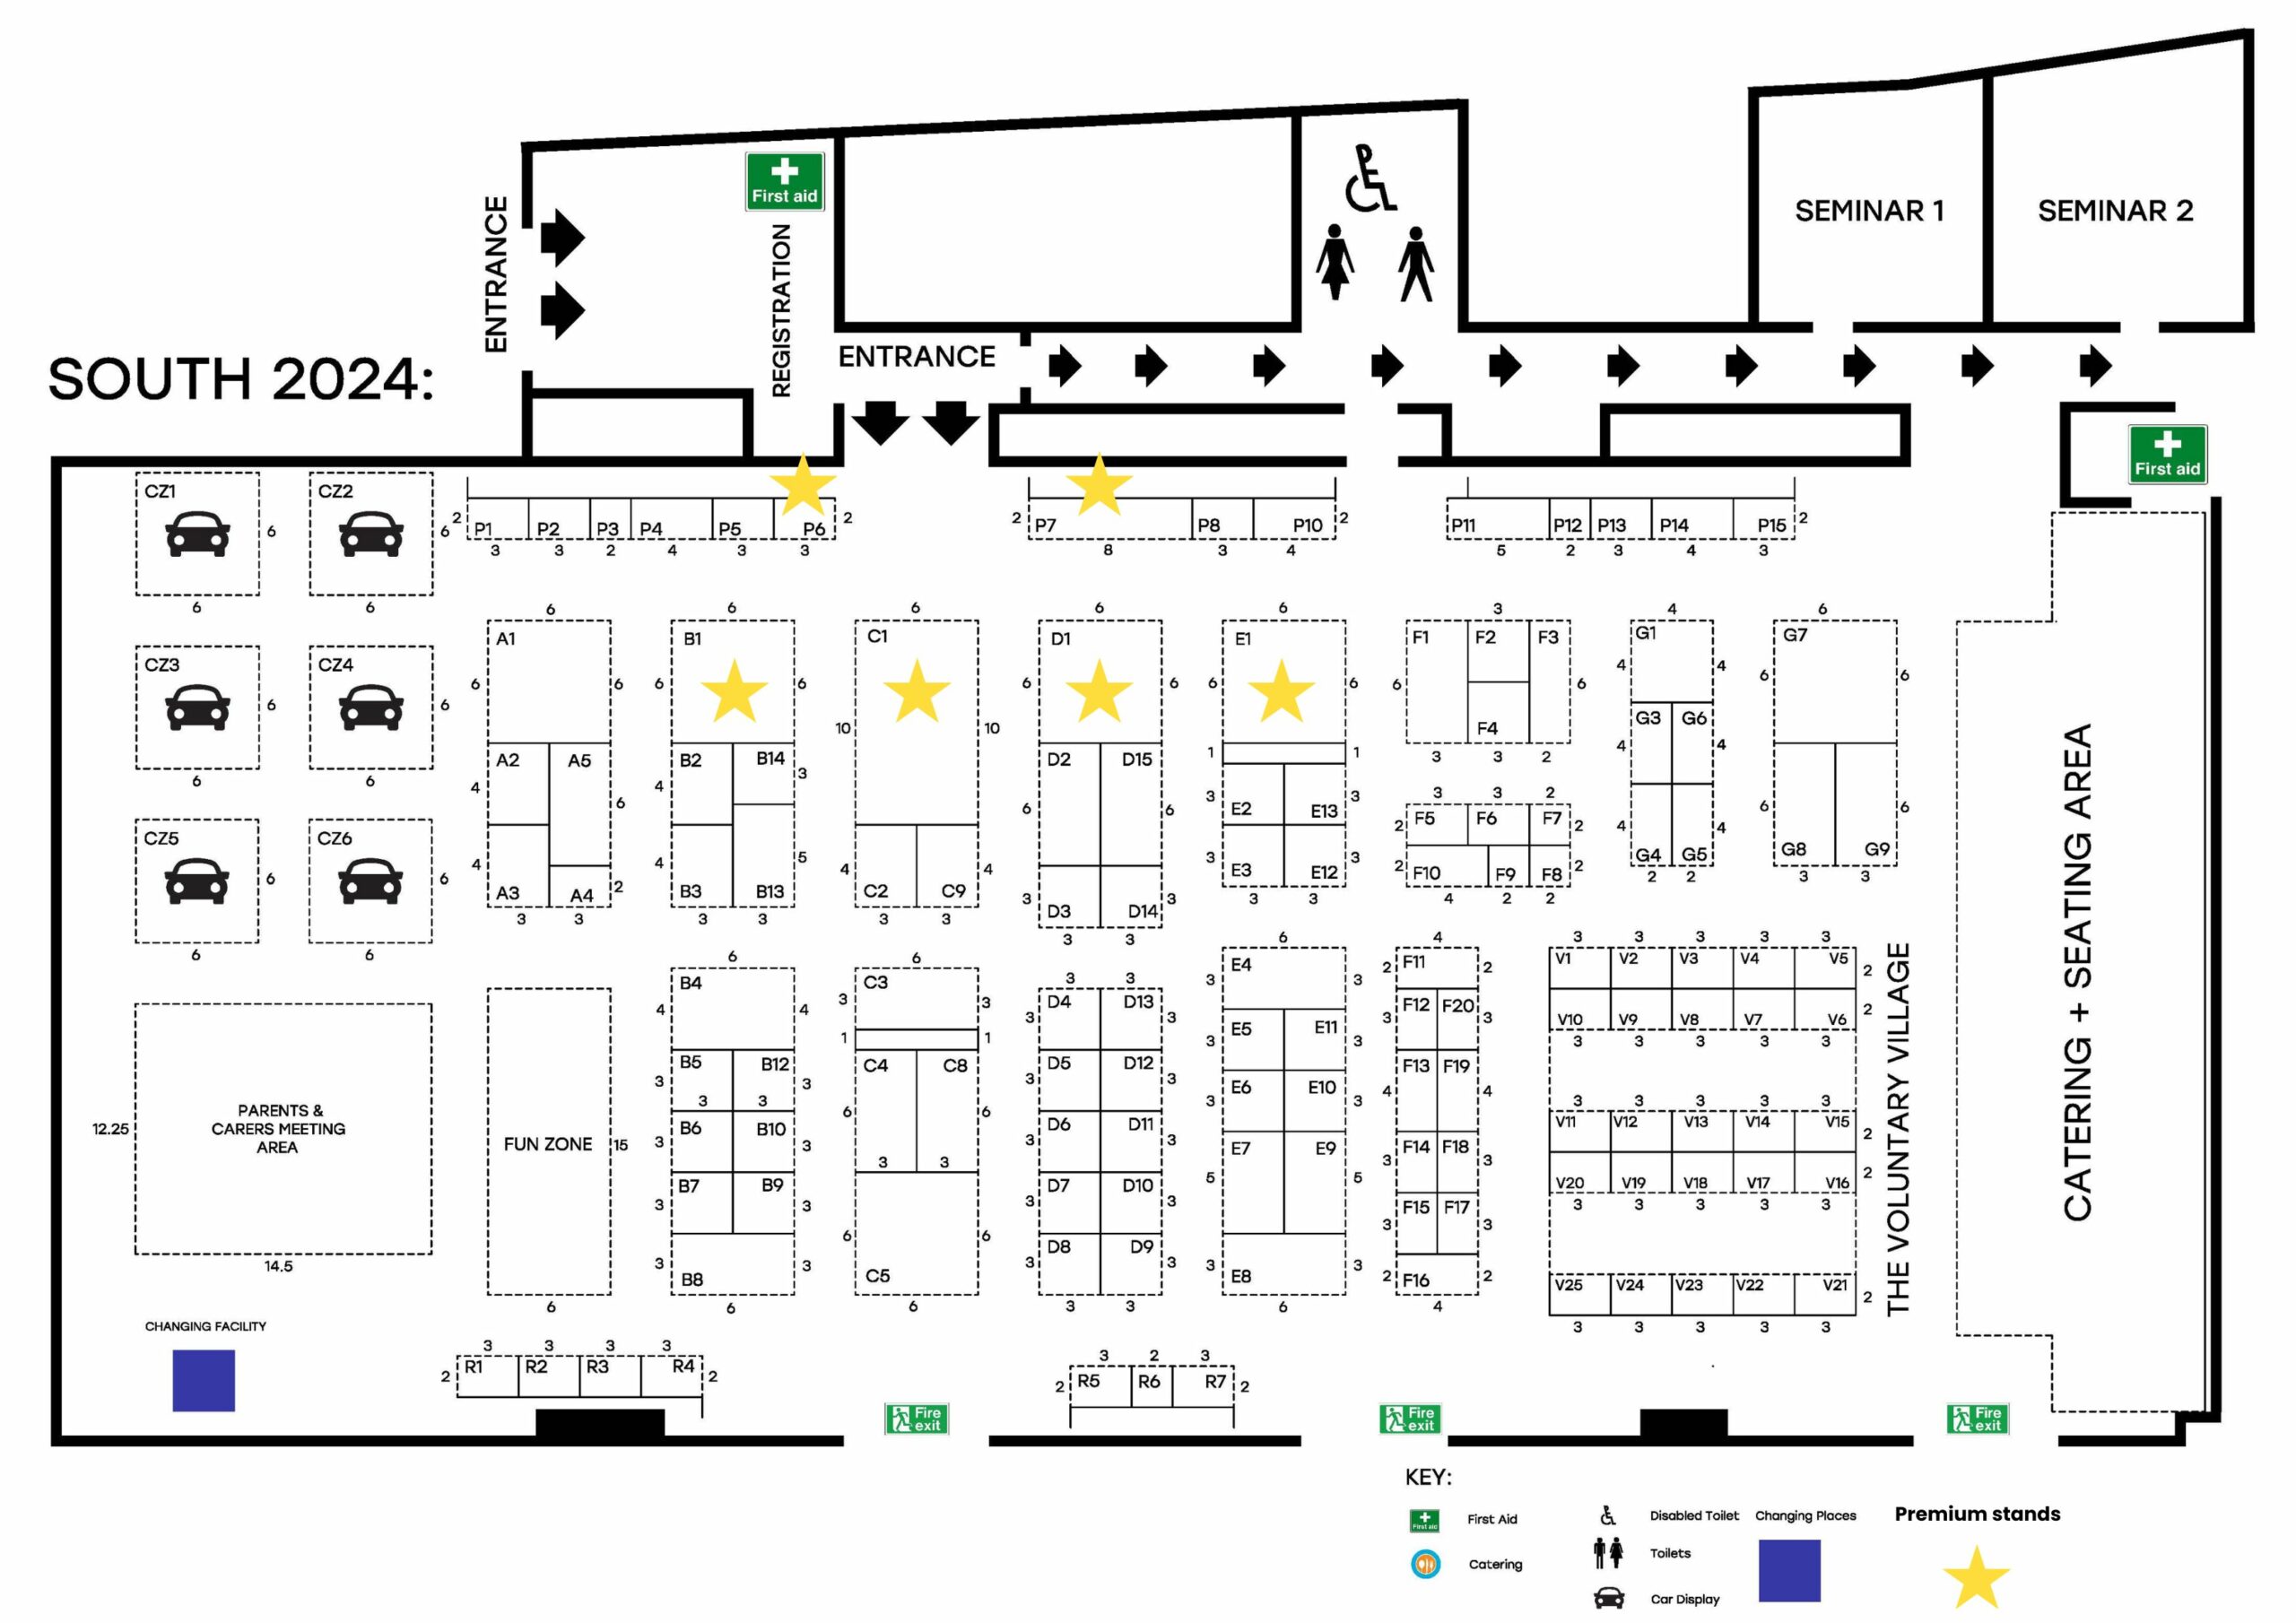 Floorplan of all the exhibition space available at the event